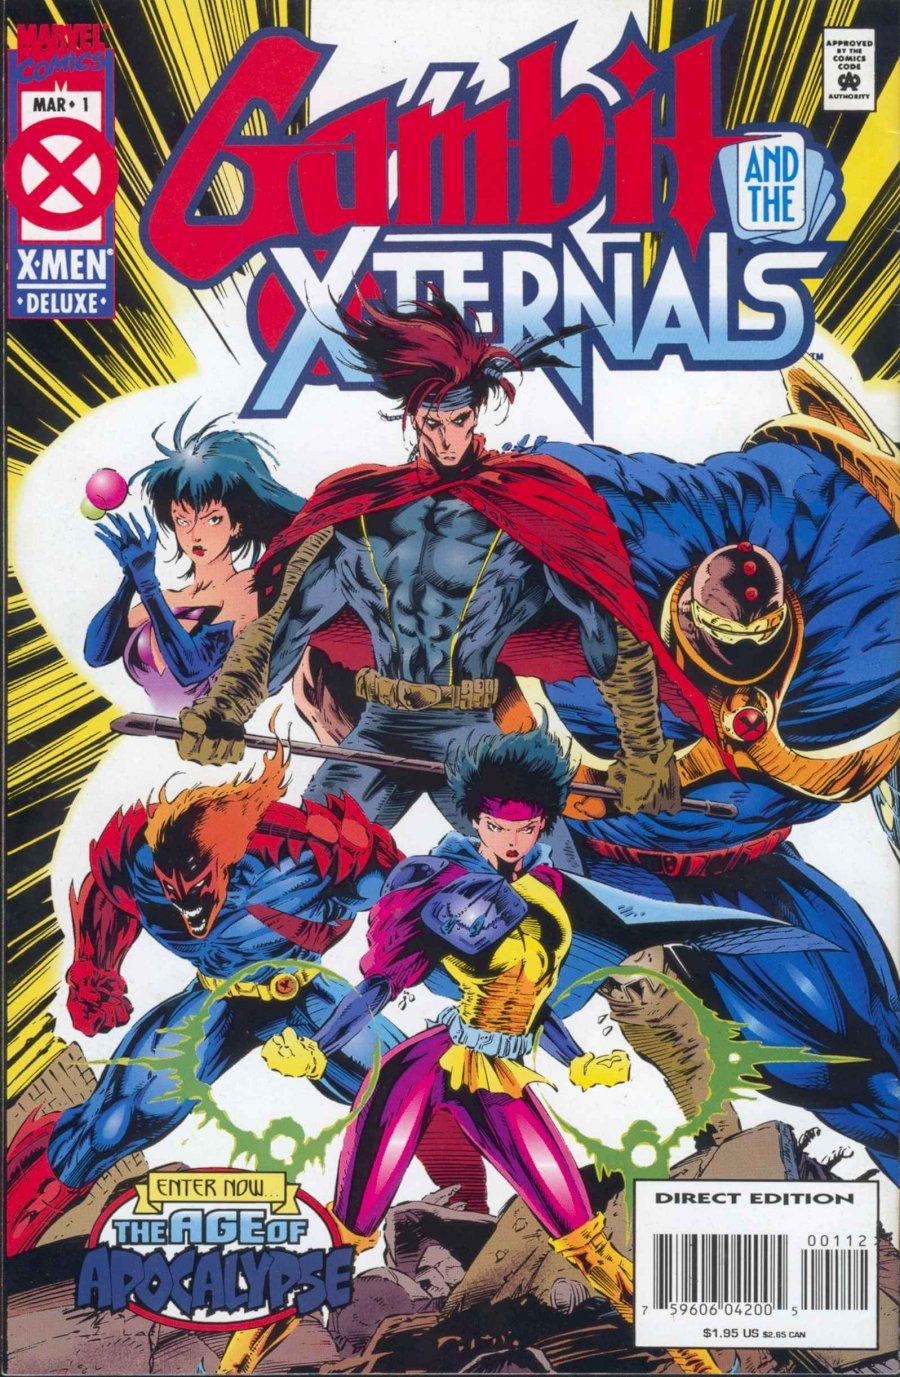 Gambit and the X-Ternals Vol. 1 #1